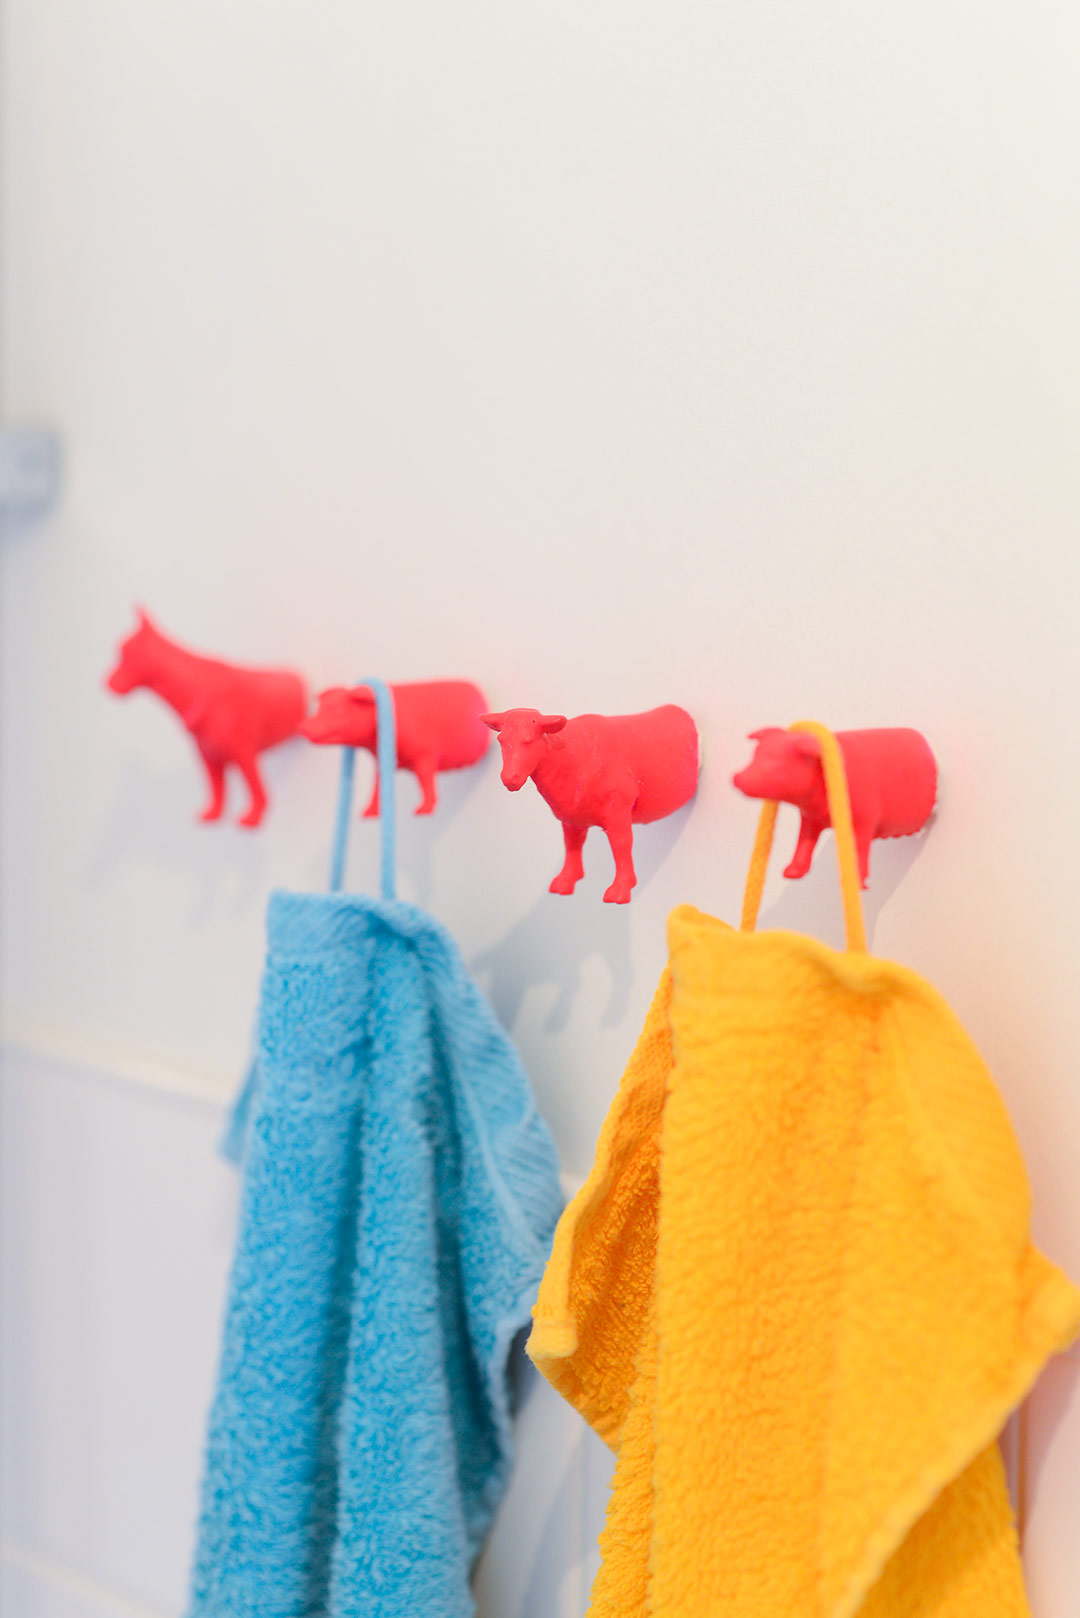 DIY towel hooks made from plastic toy animals